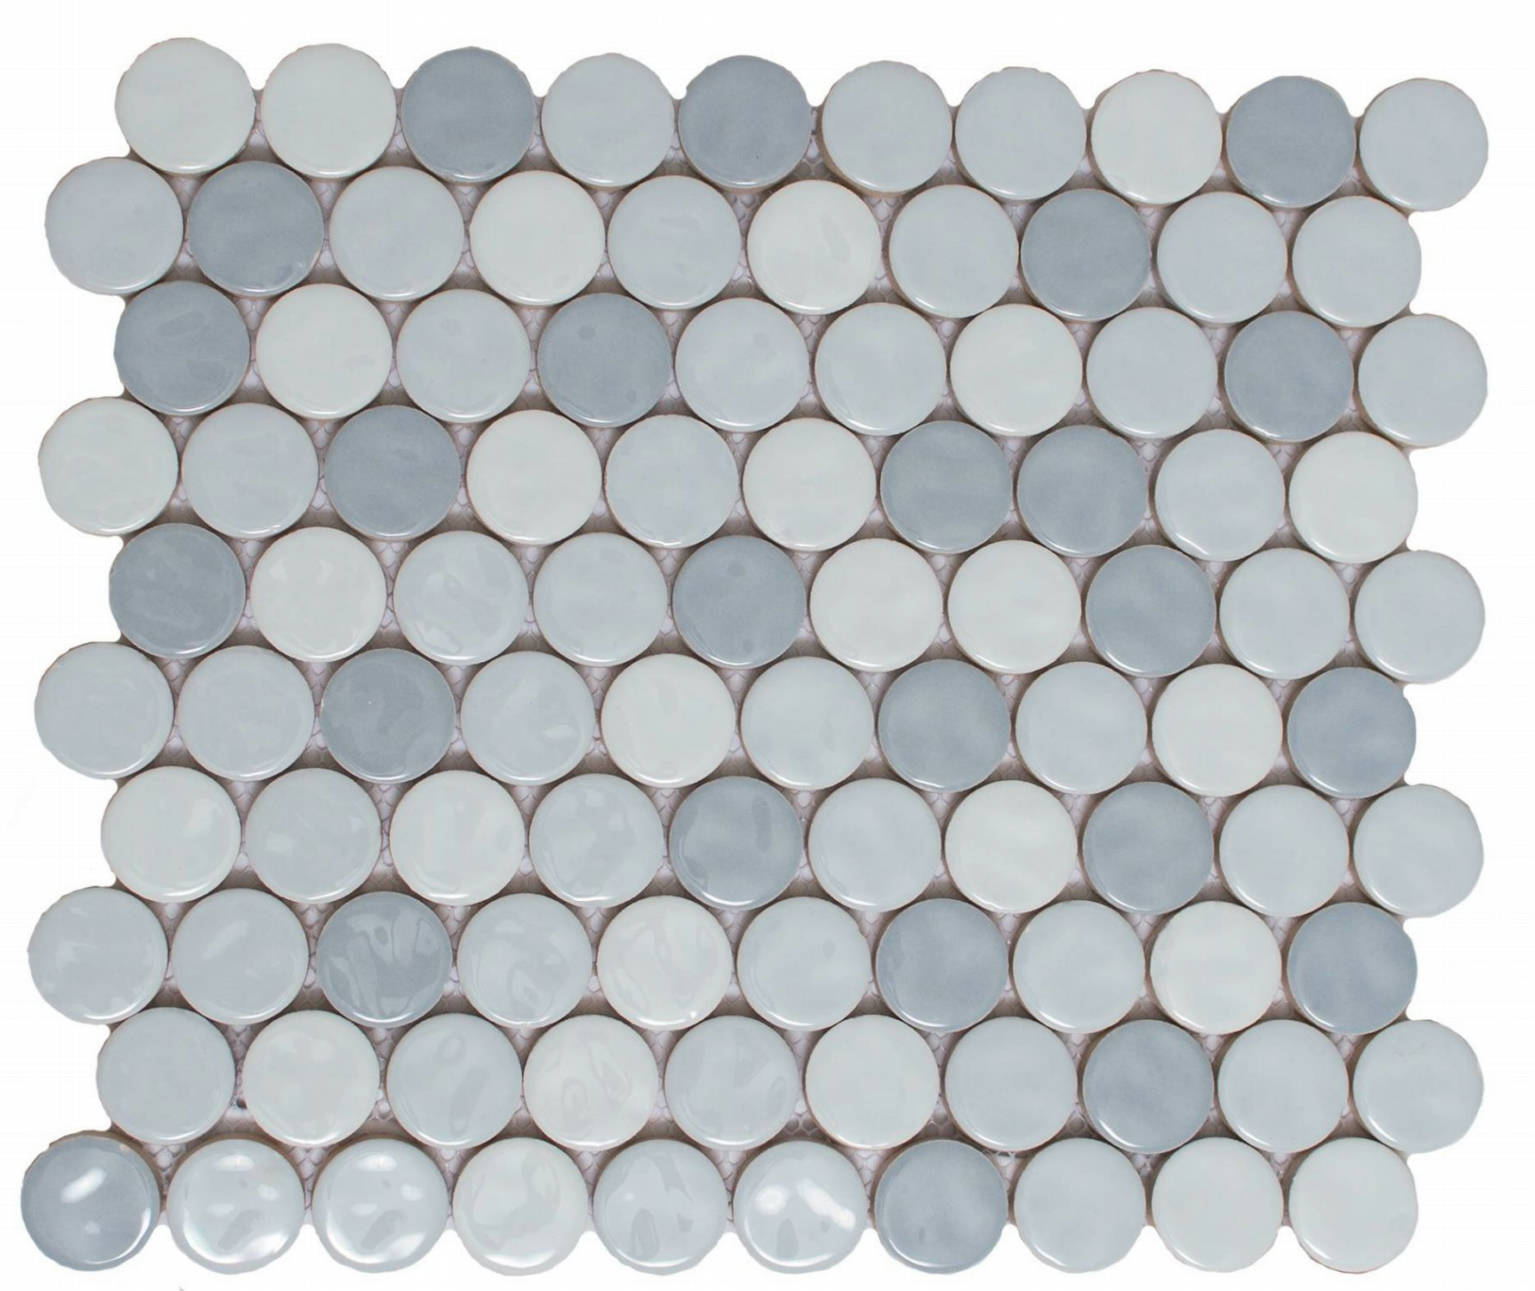 QS14-131415 | Stones & More | Finest selection of Mosaics, Glass, Tile and Stone